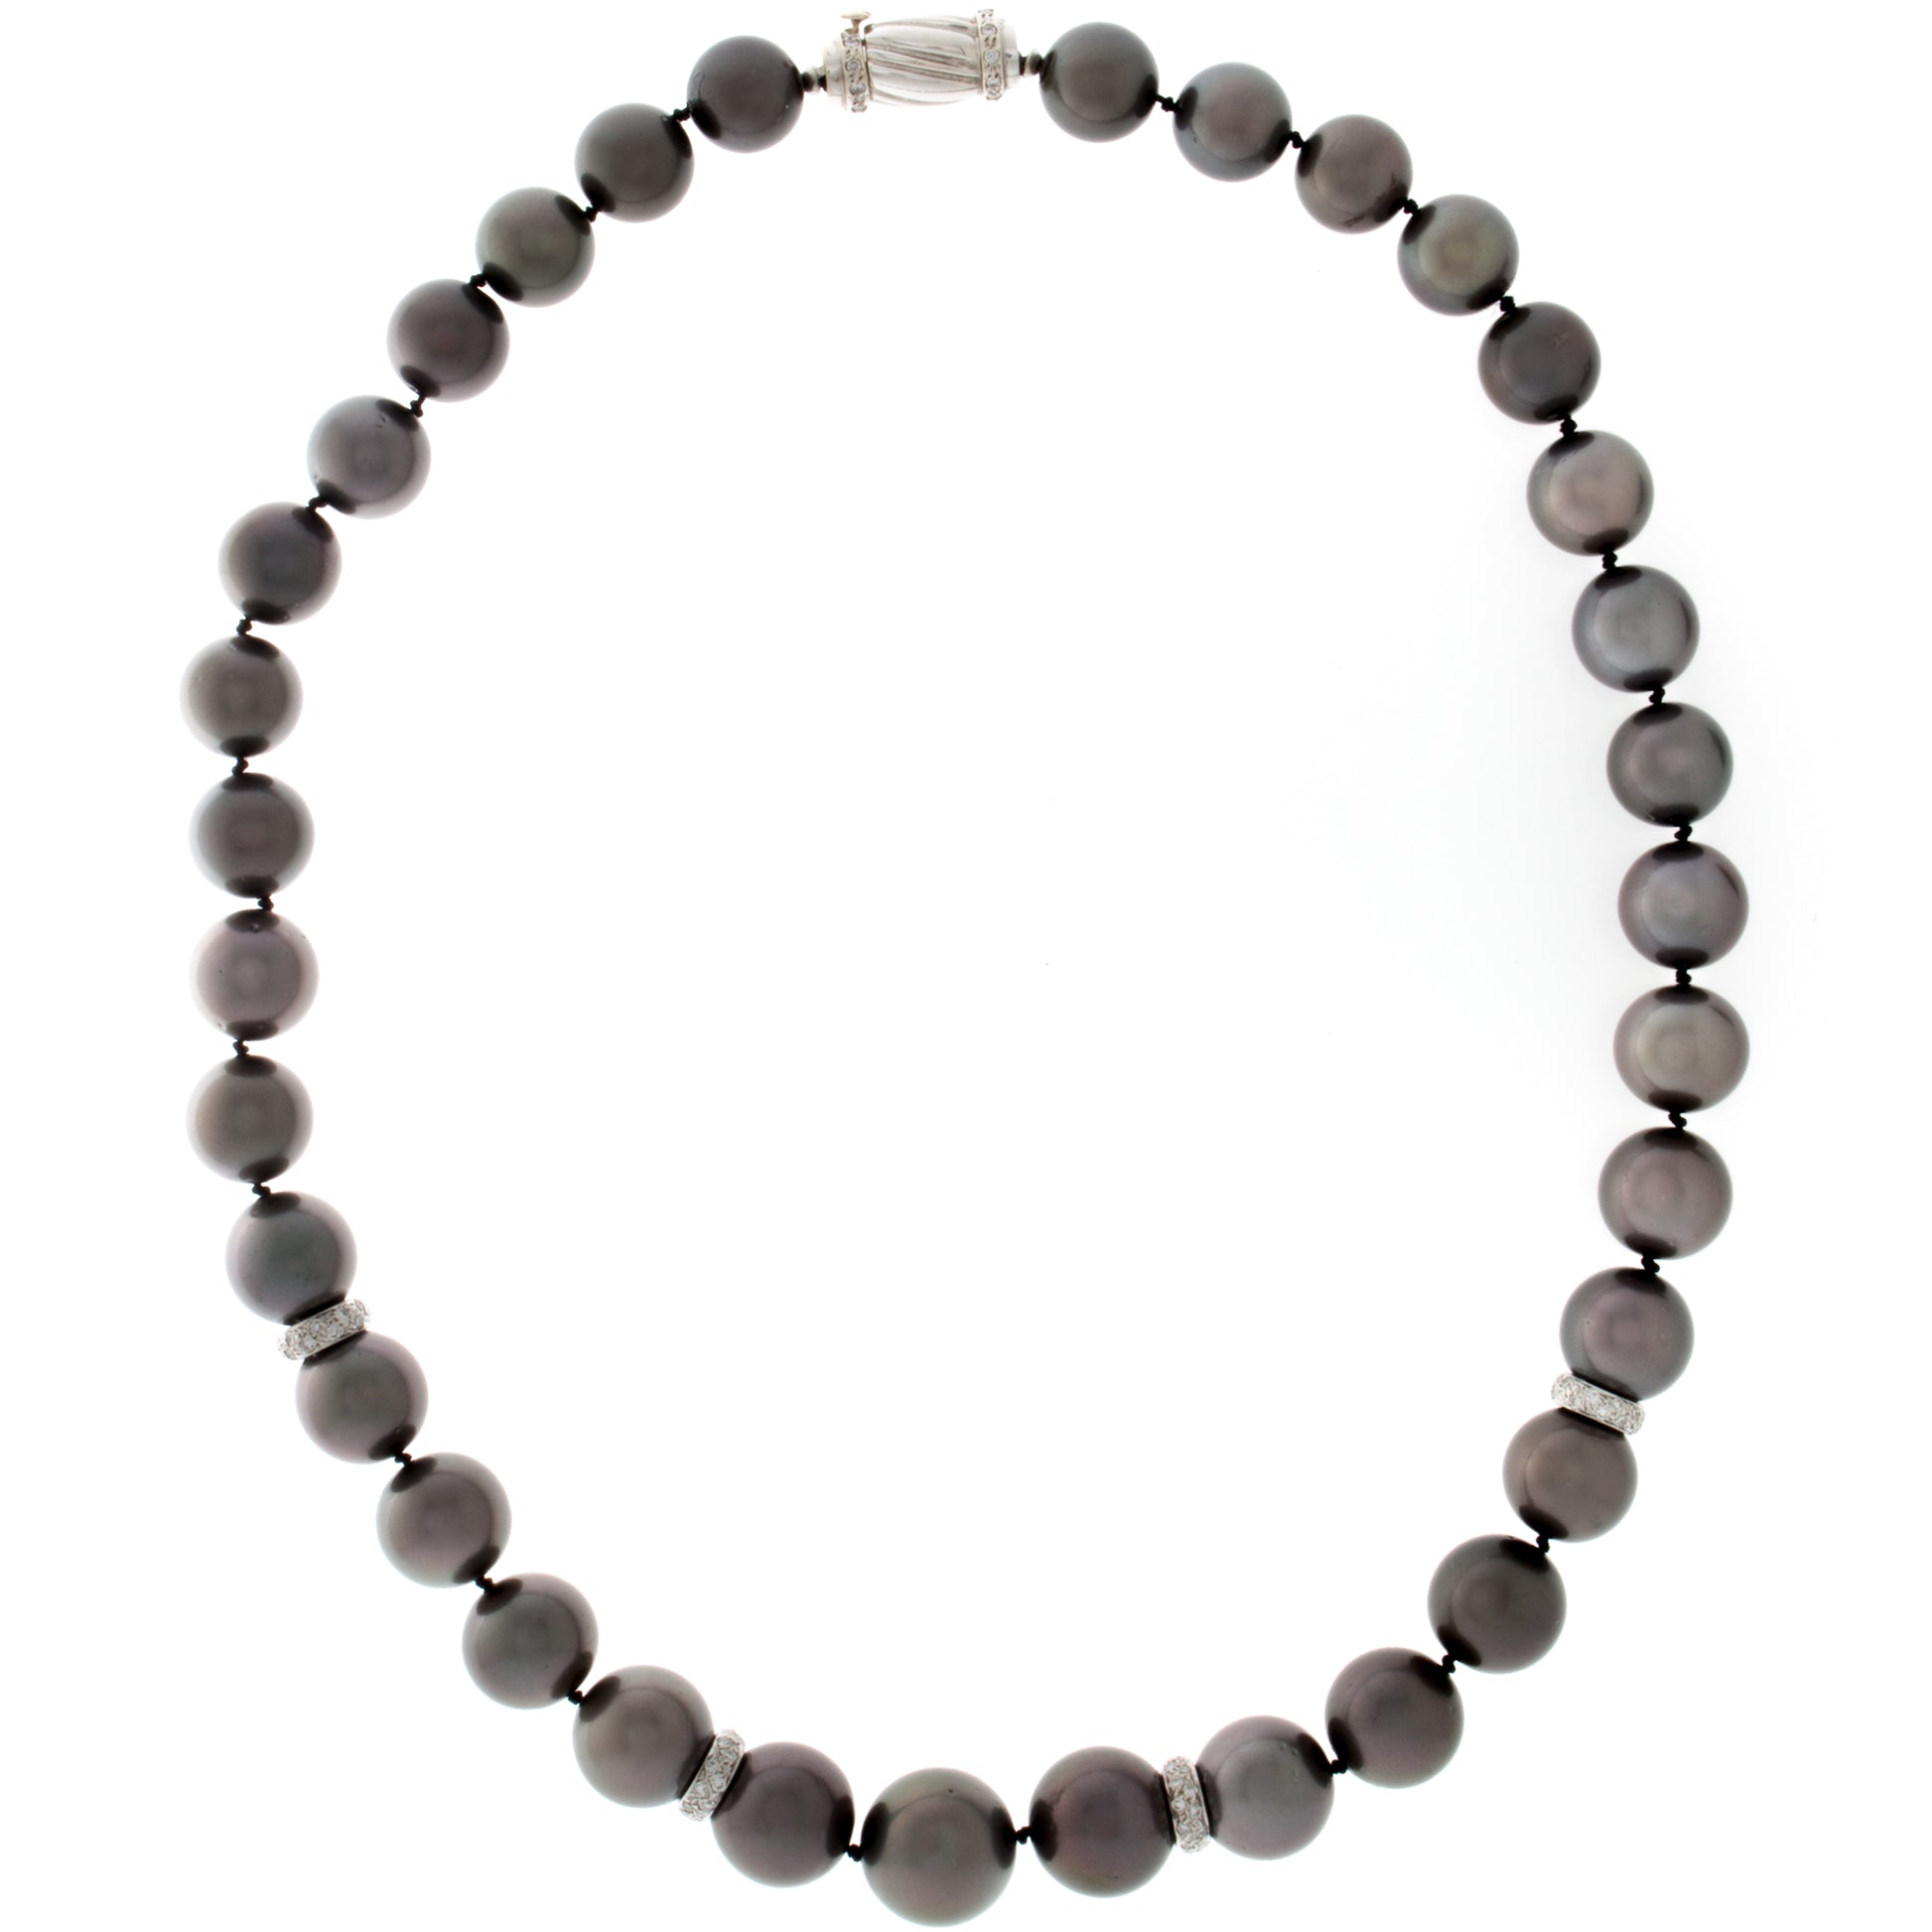 Tahitian Black Pearl Necklace with Four Diamond Rondelle and 14K White Gold Catch. Full Necklace View